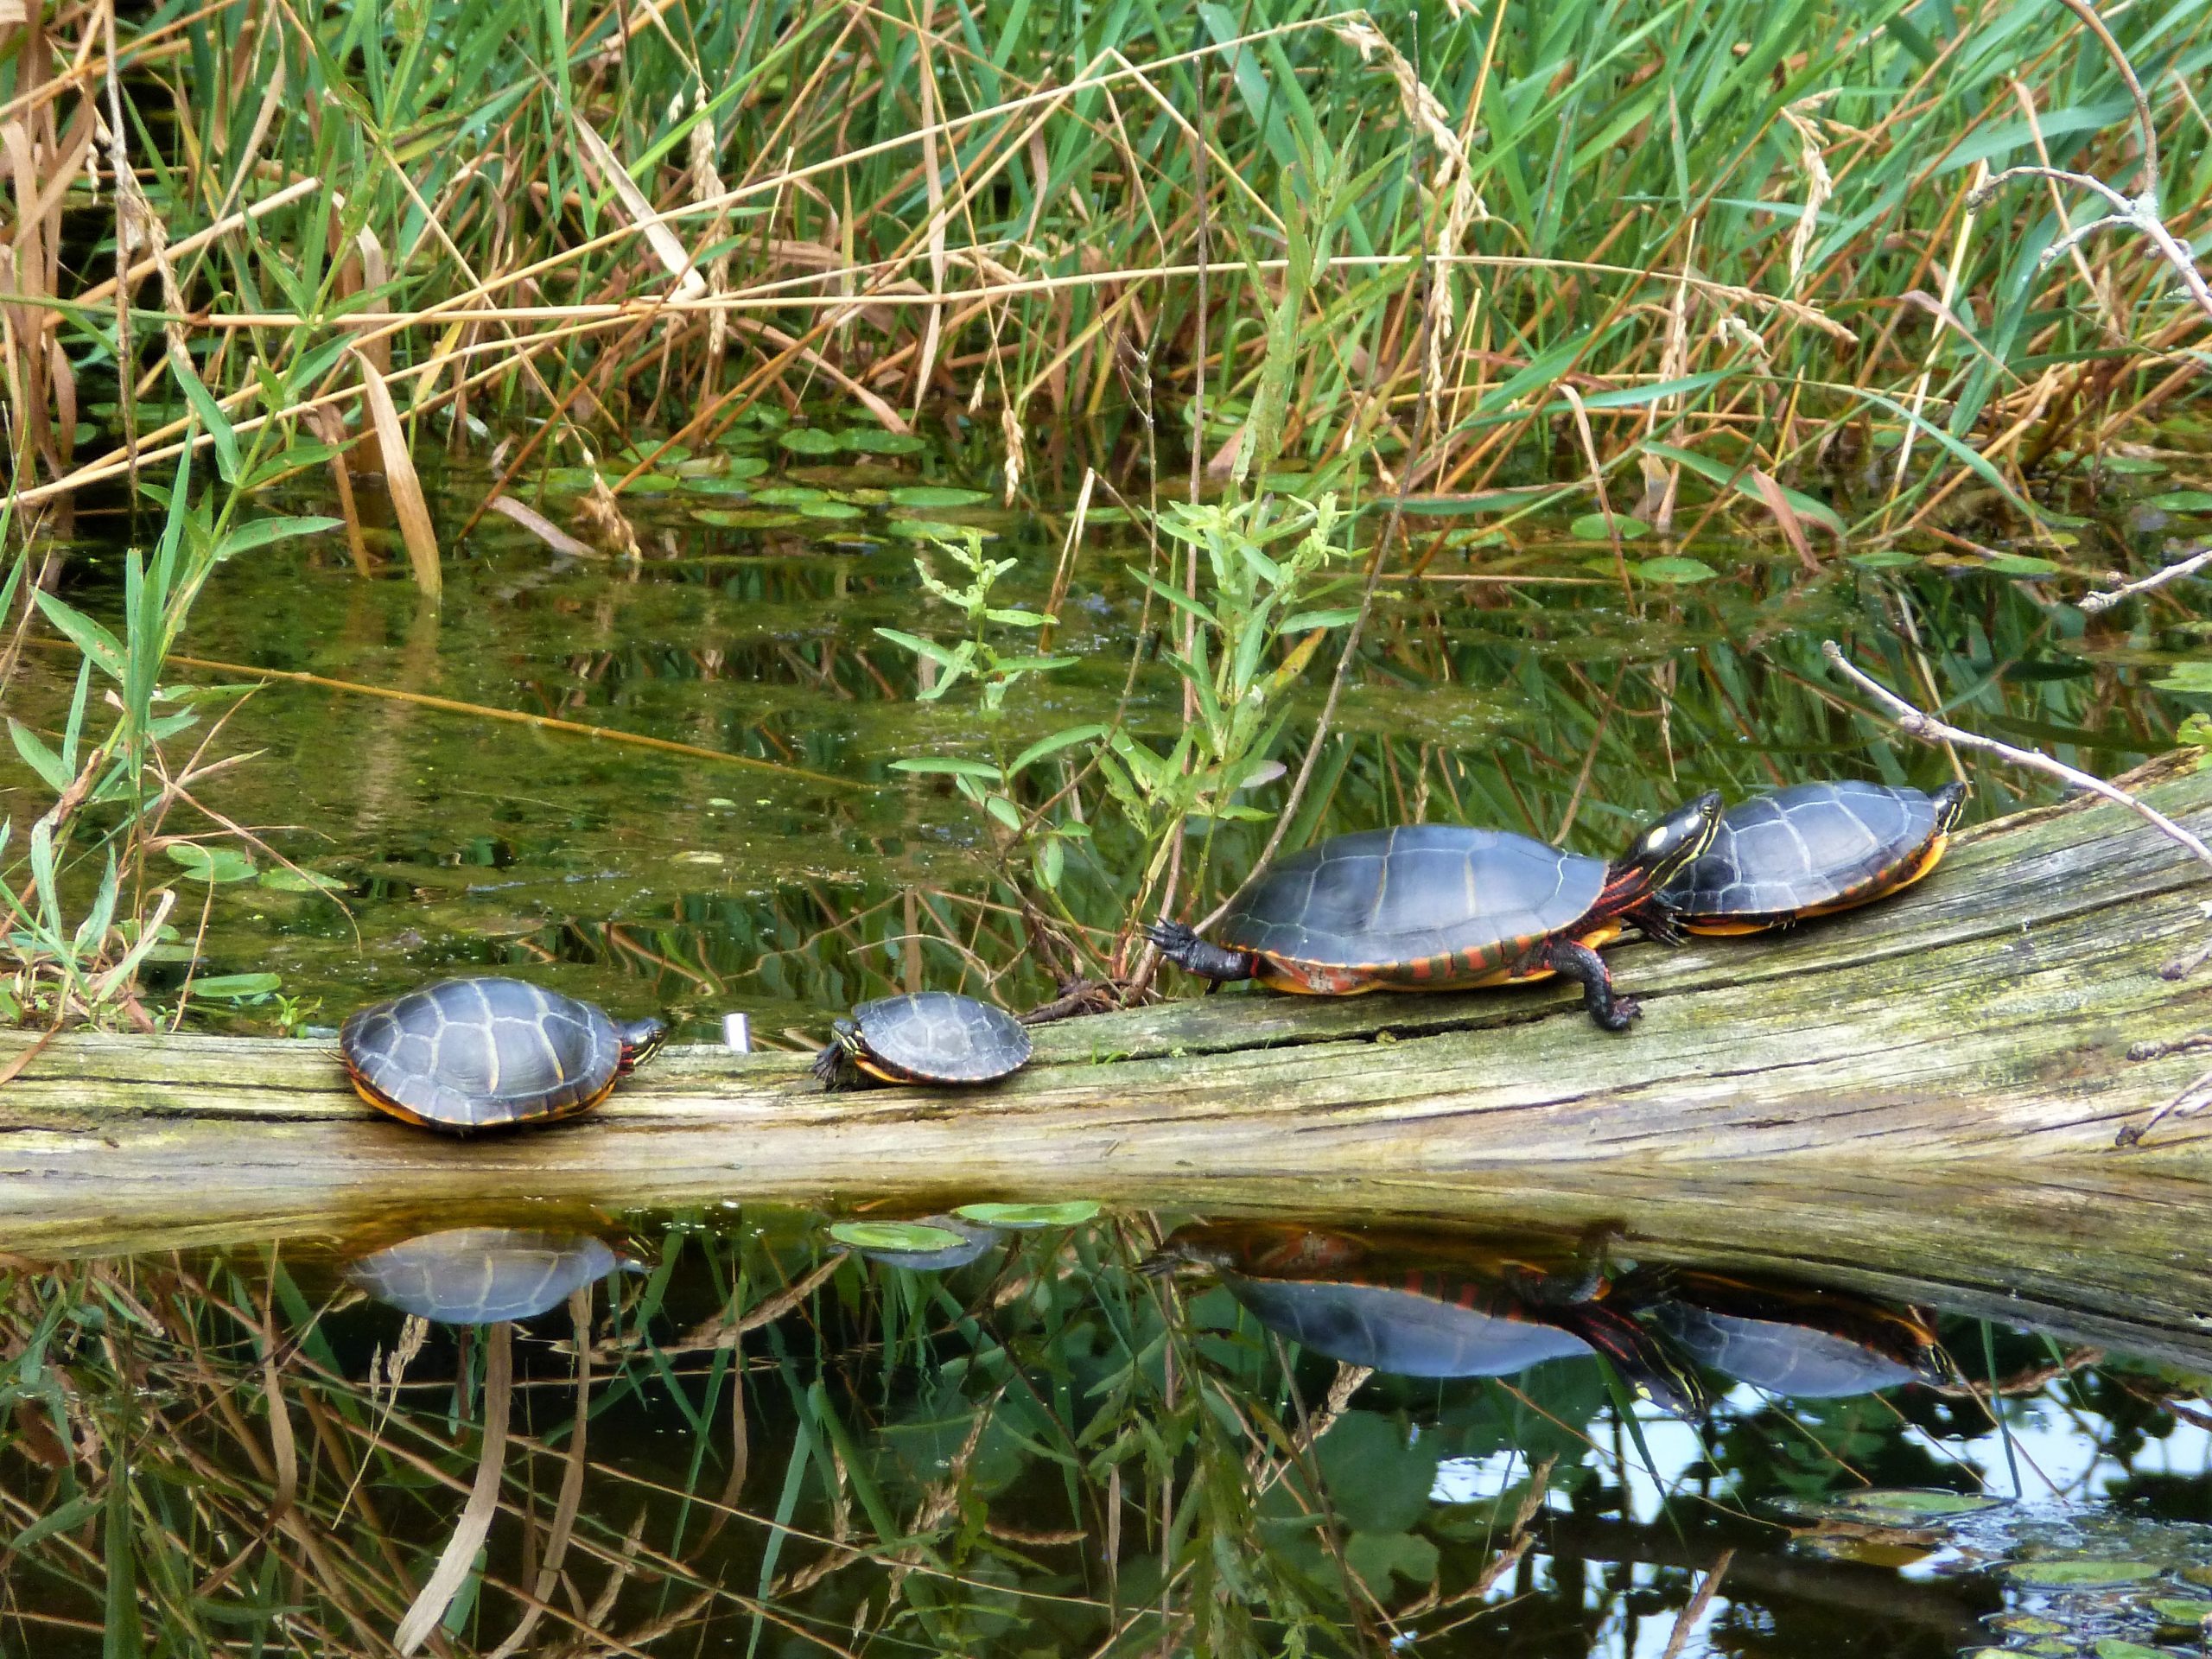 Four turtles sunning on a log